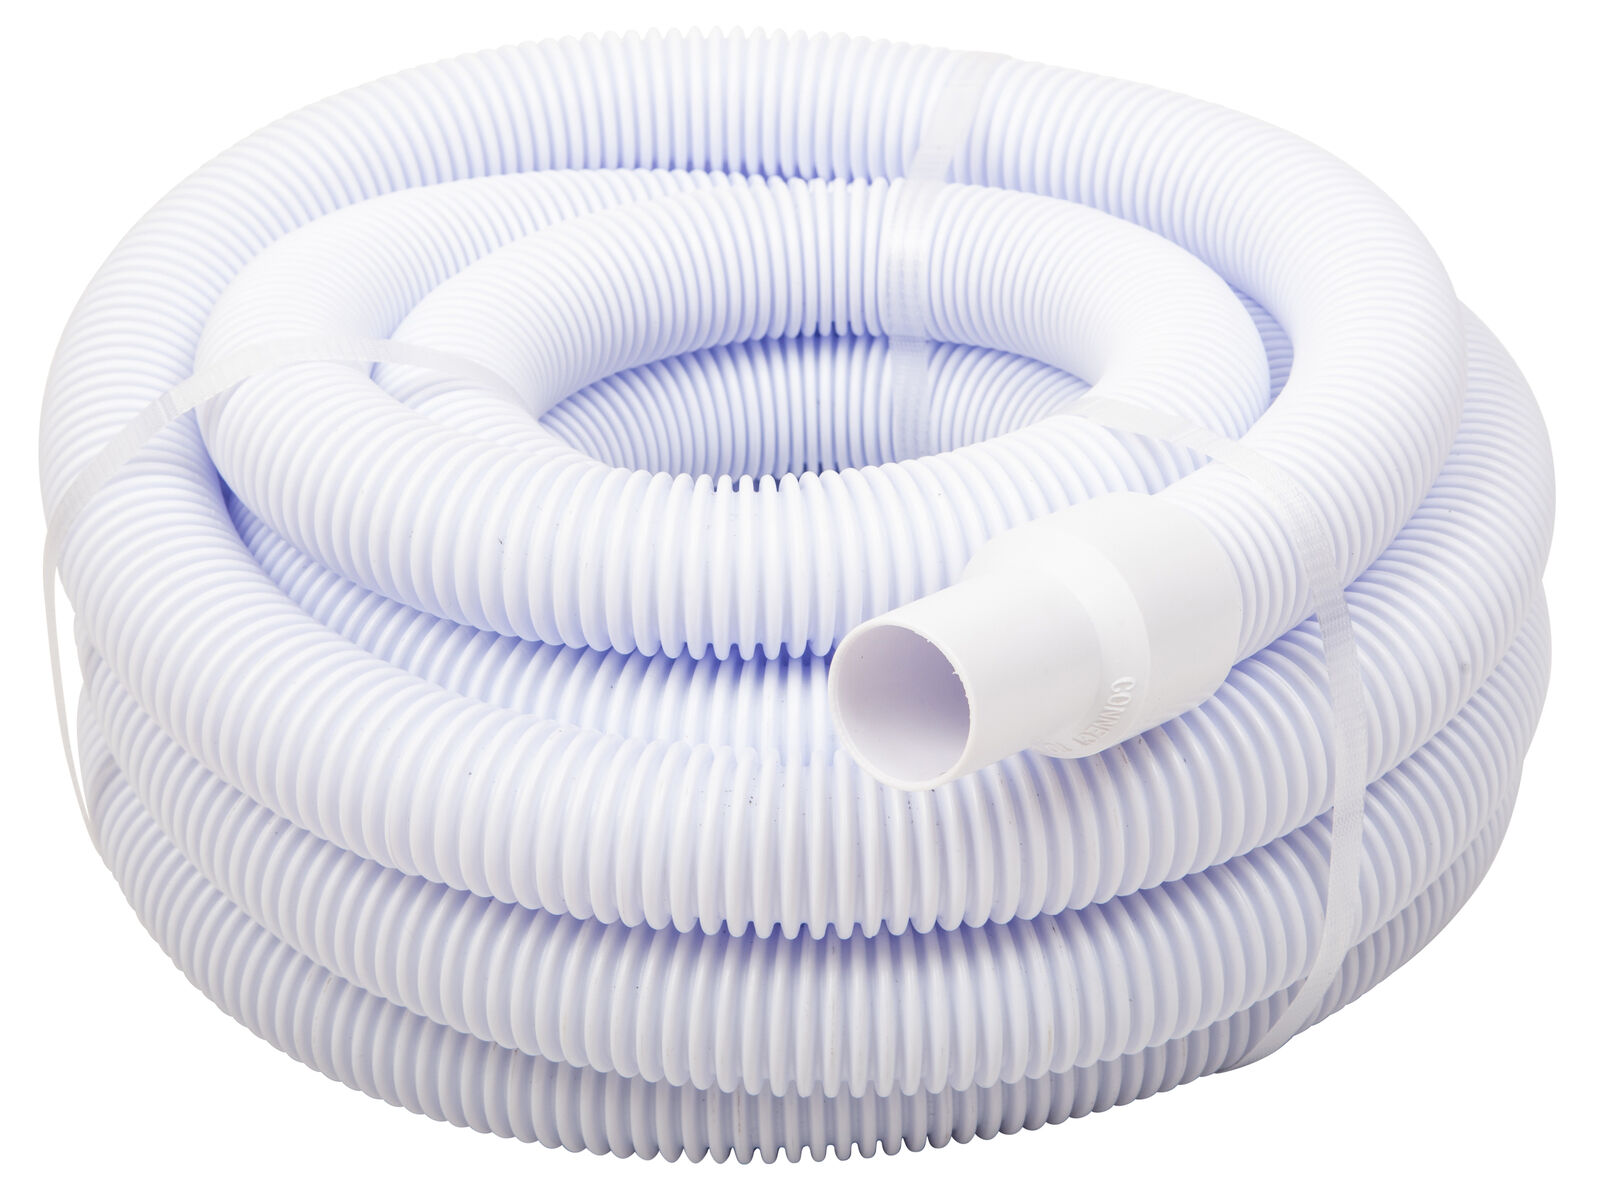 Swimming pool Vacuum Hose 1.5 30 foot length with Swivel End for